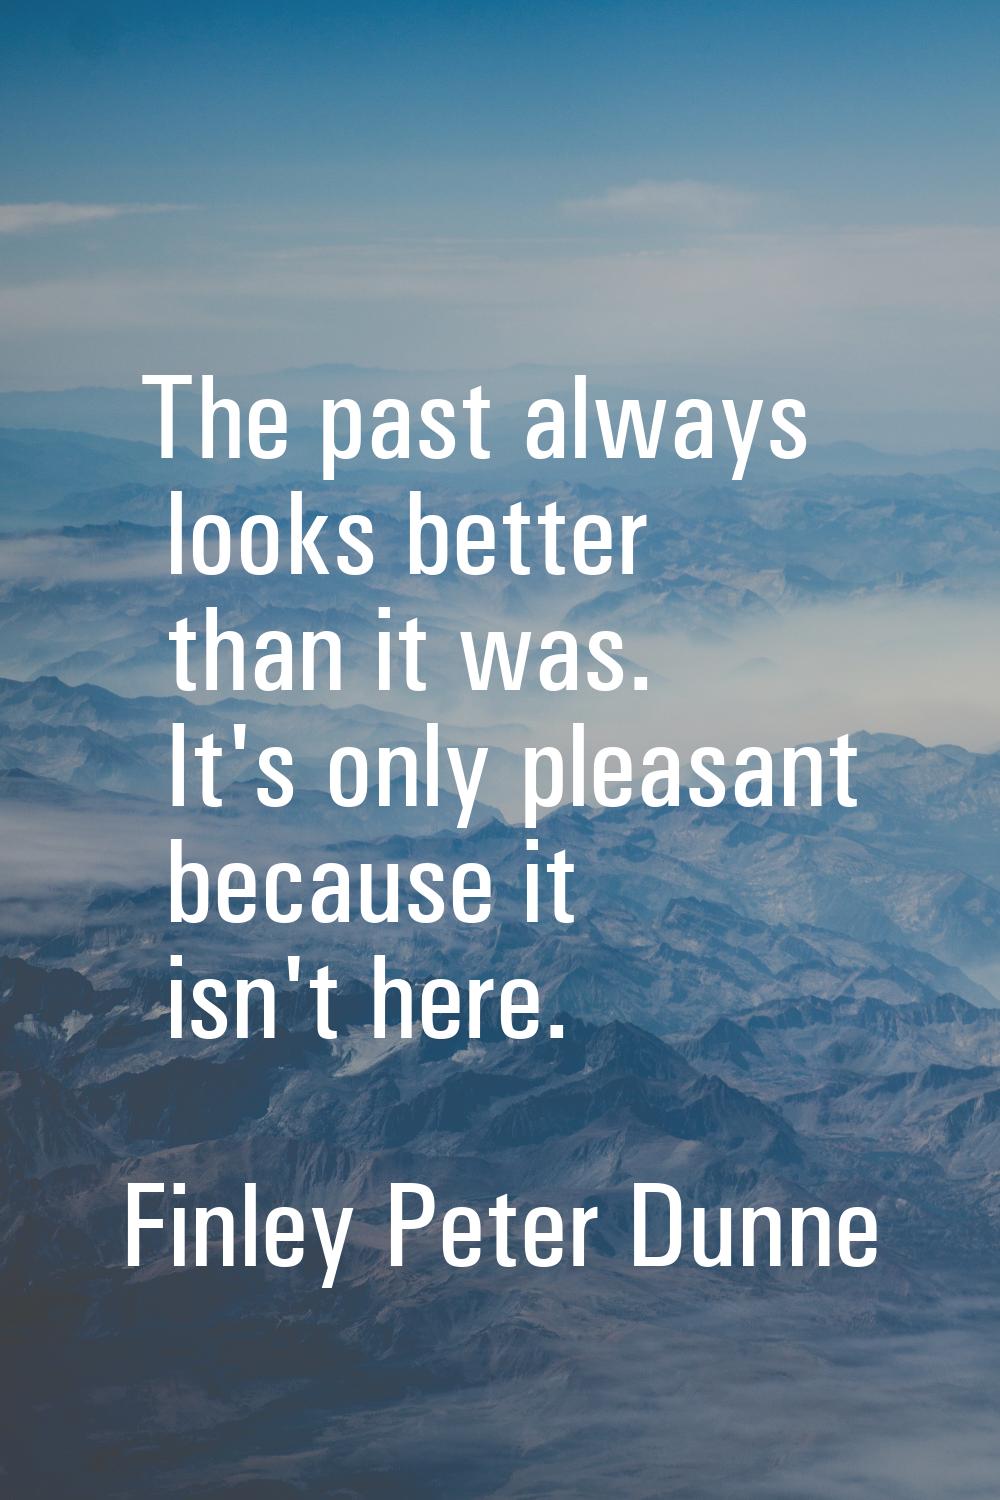 The past always looks better than it was. It's only pleasant because it isn't here.